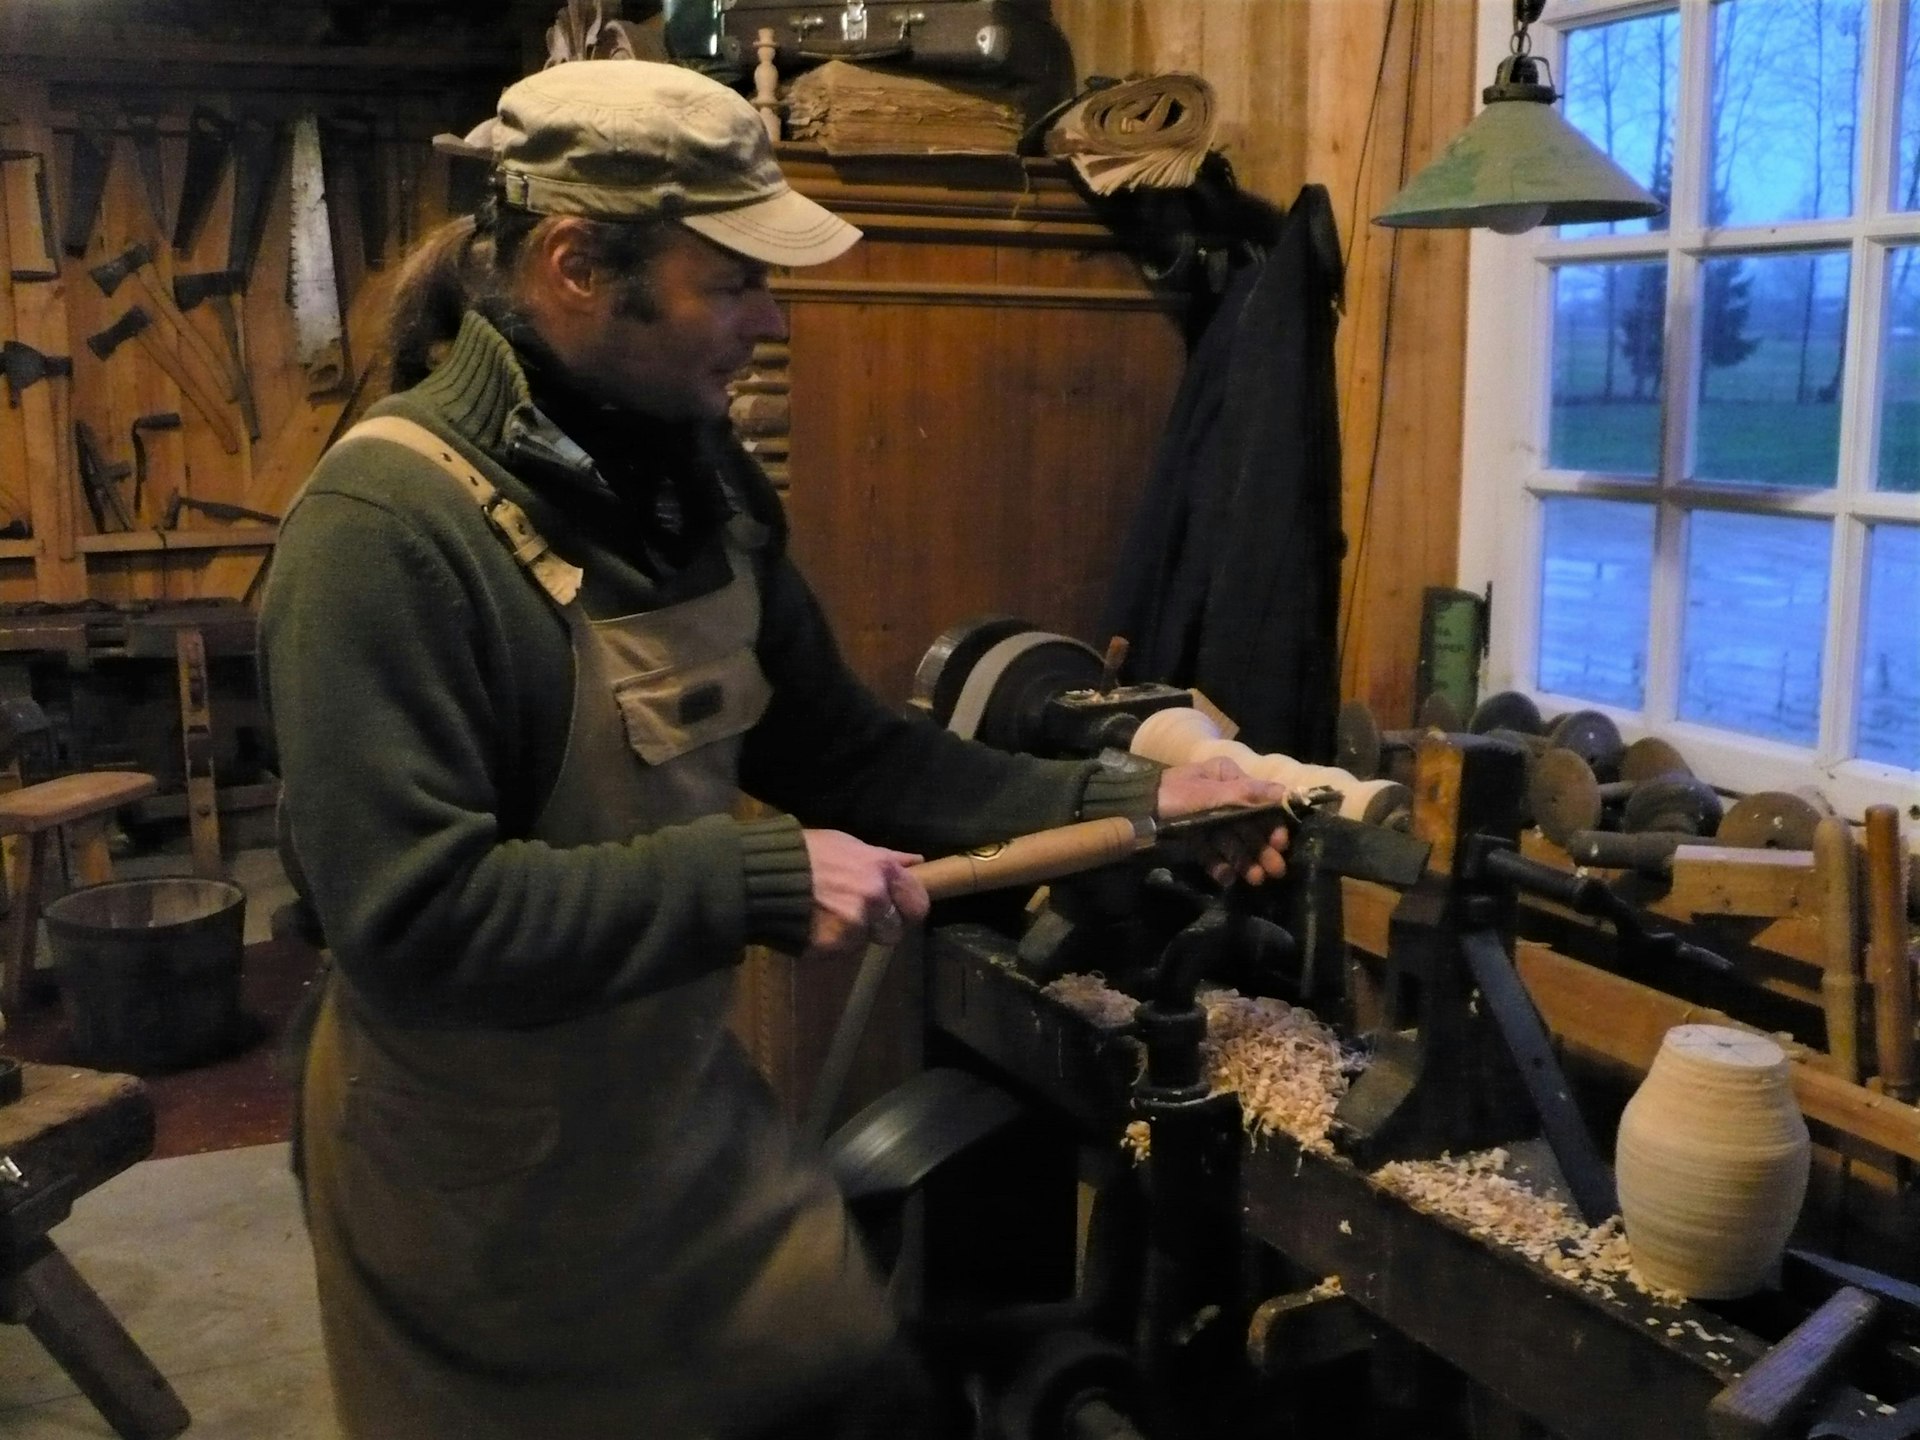 A man in a workshop leans over some wood in a vice. He's holding tools that are shaping the wood